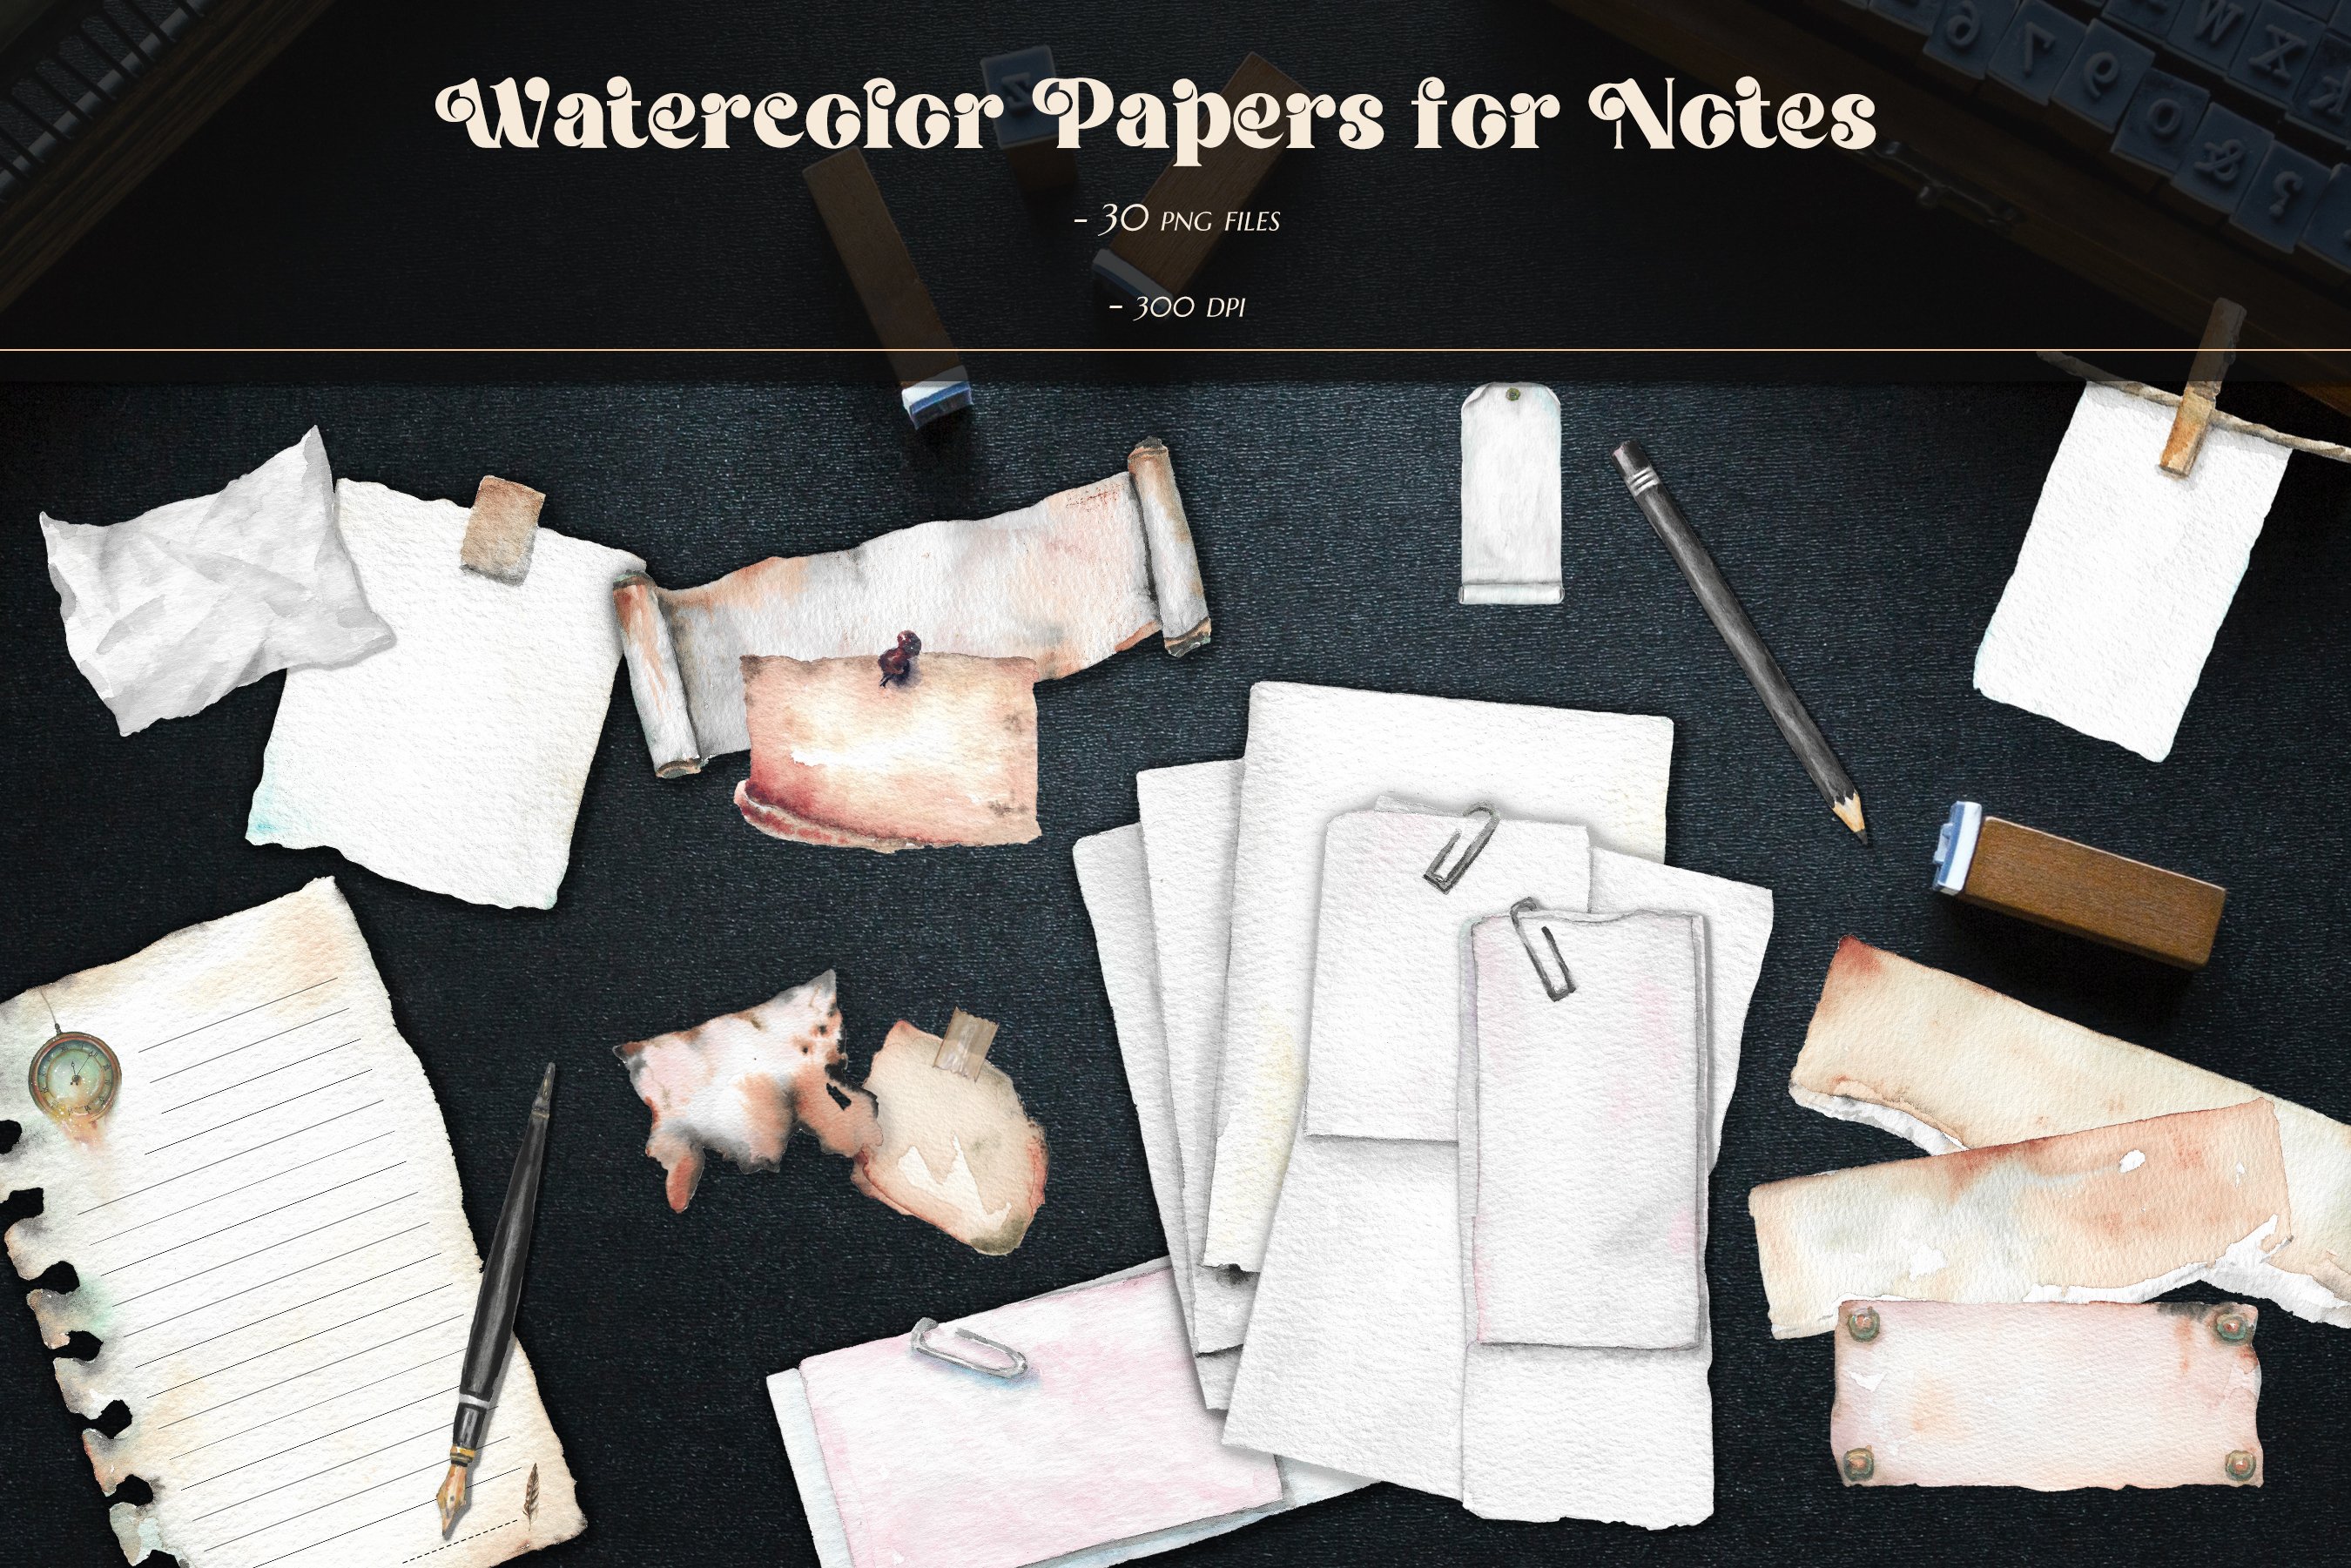 Watercolor Art Supplies And Textures Collection